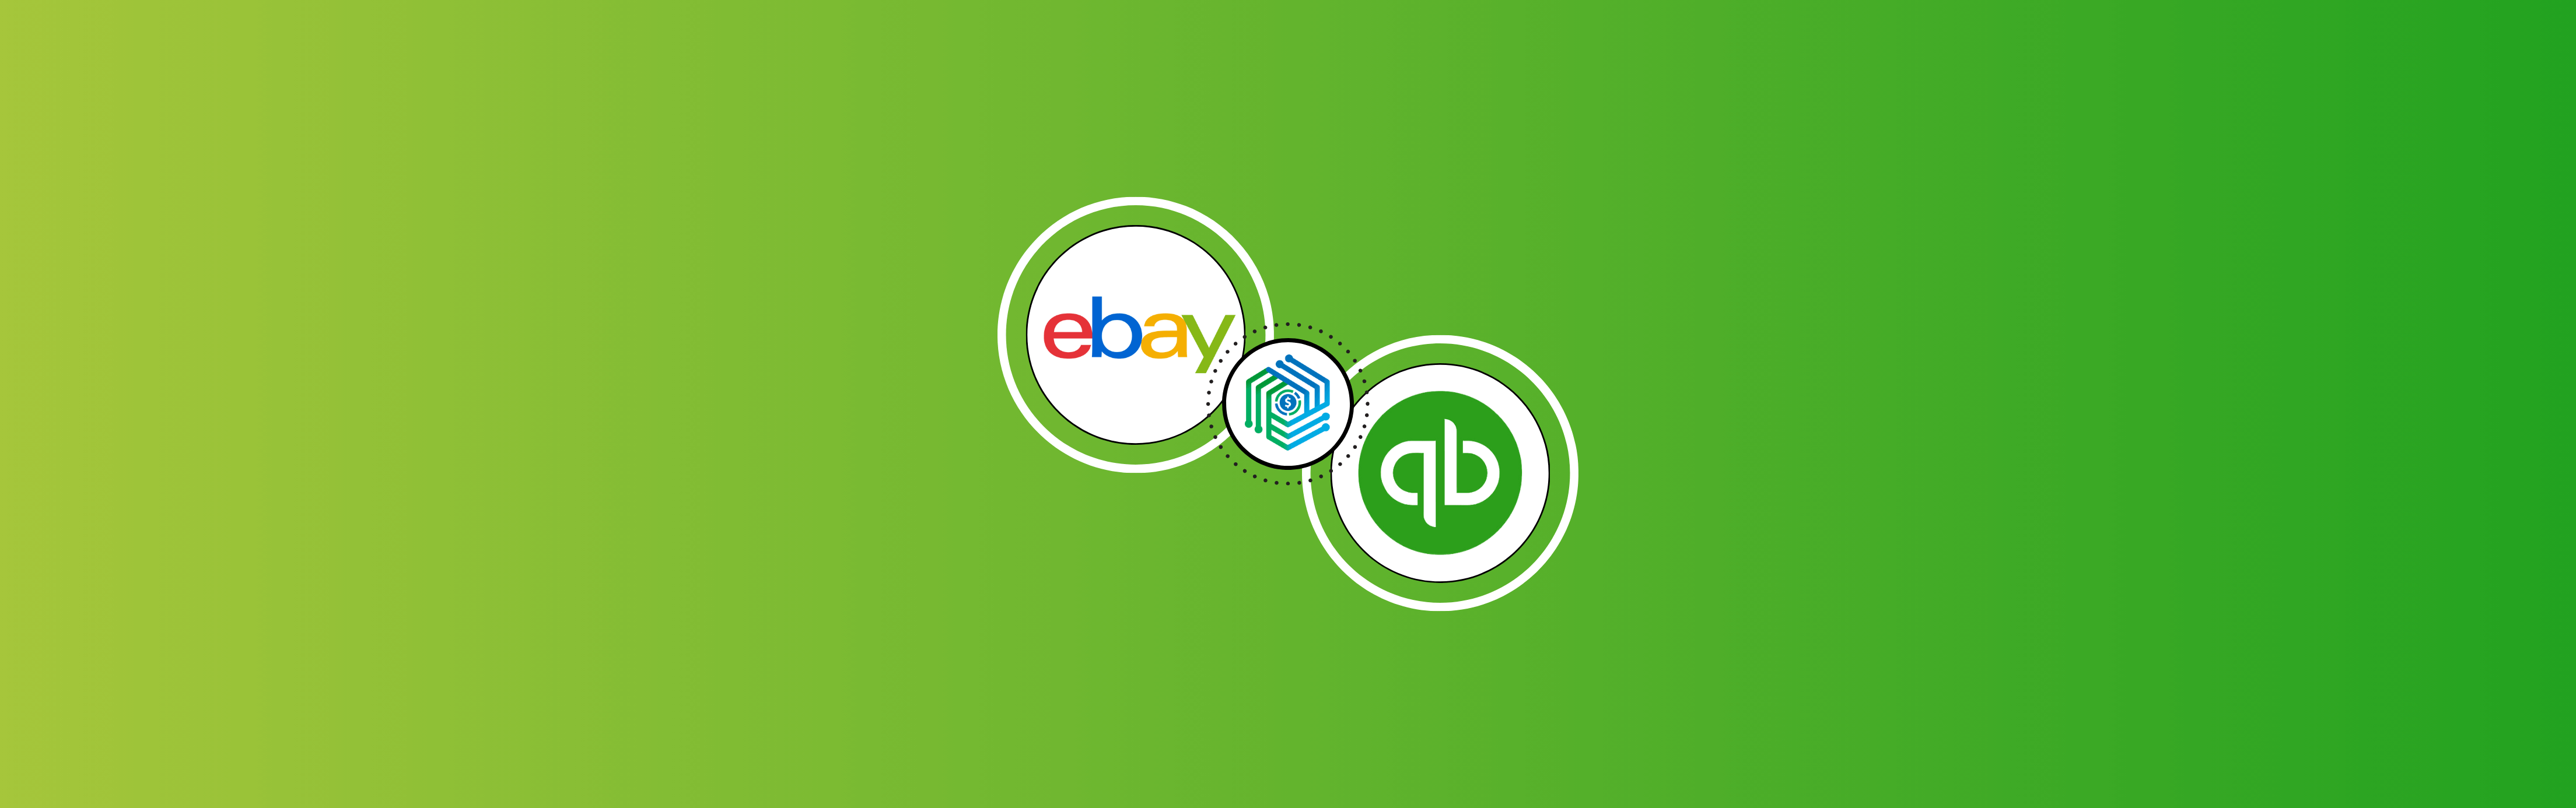 eBay QuickBooks Integration: Making the Most of Connecting eBay to QuickBooks Online